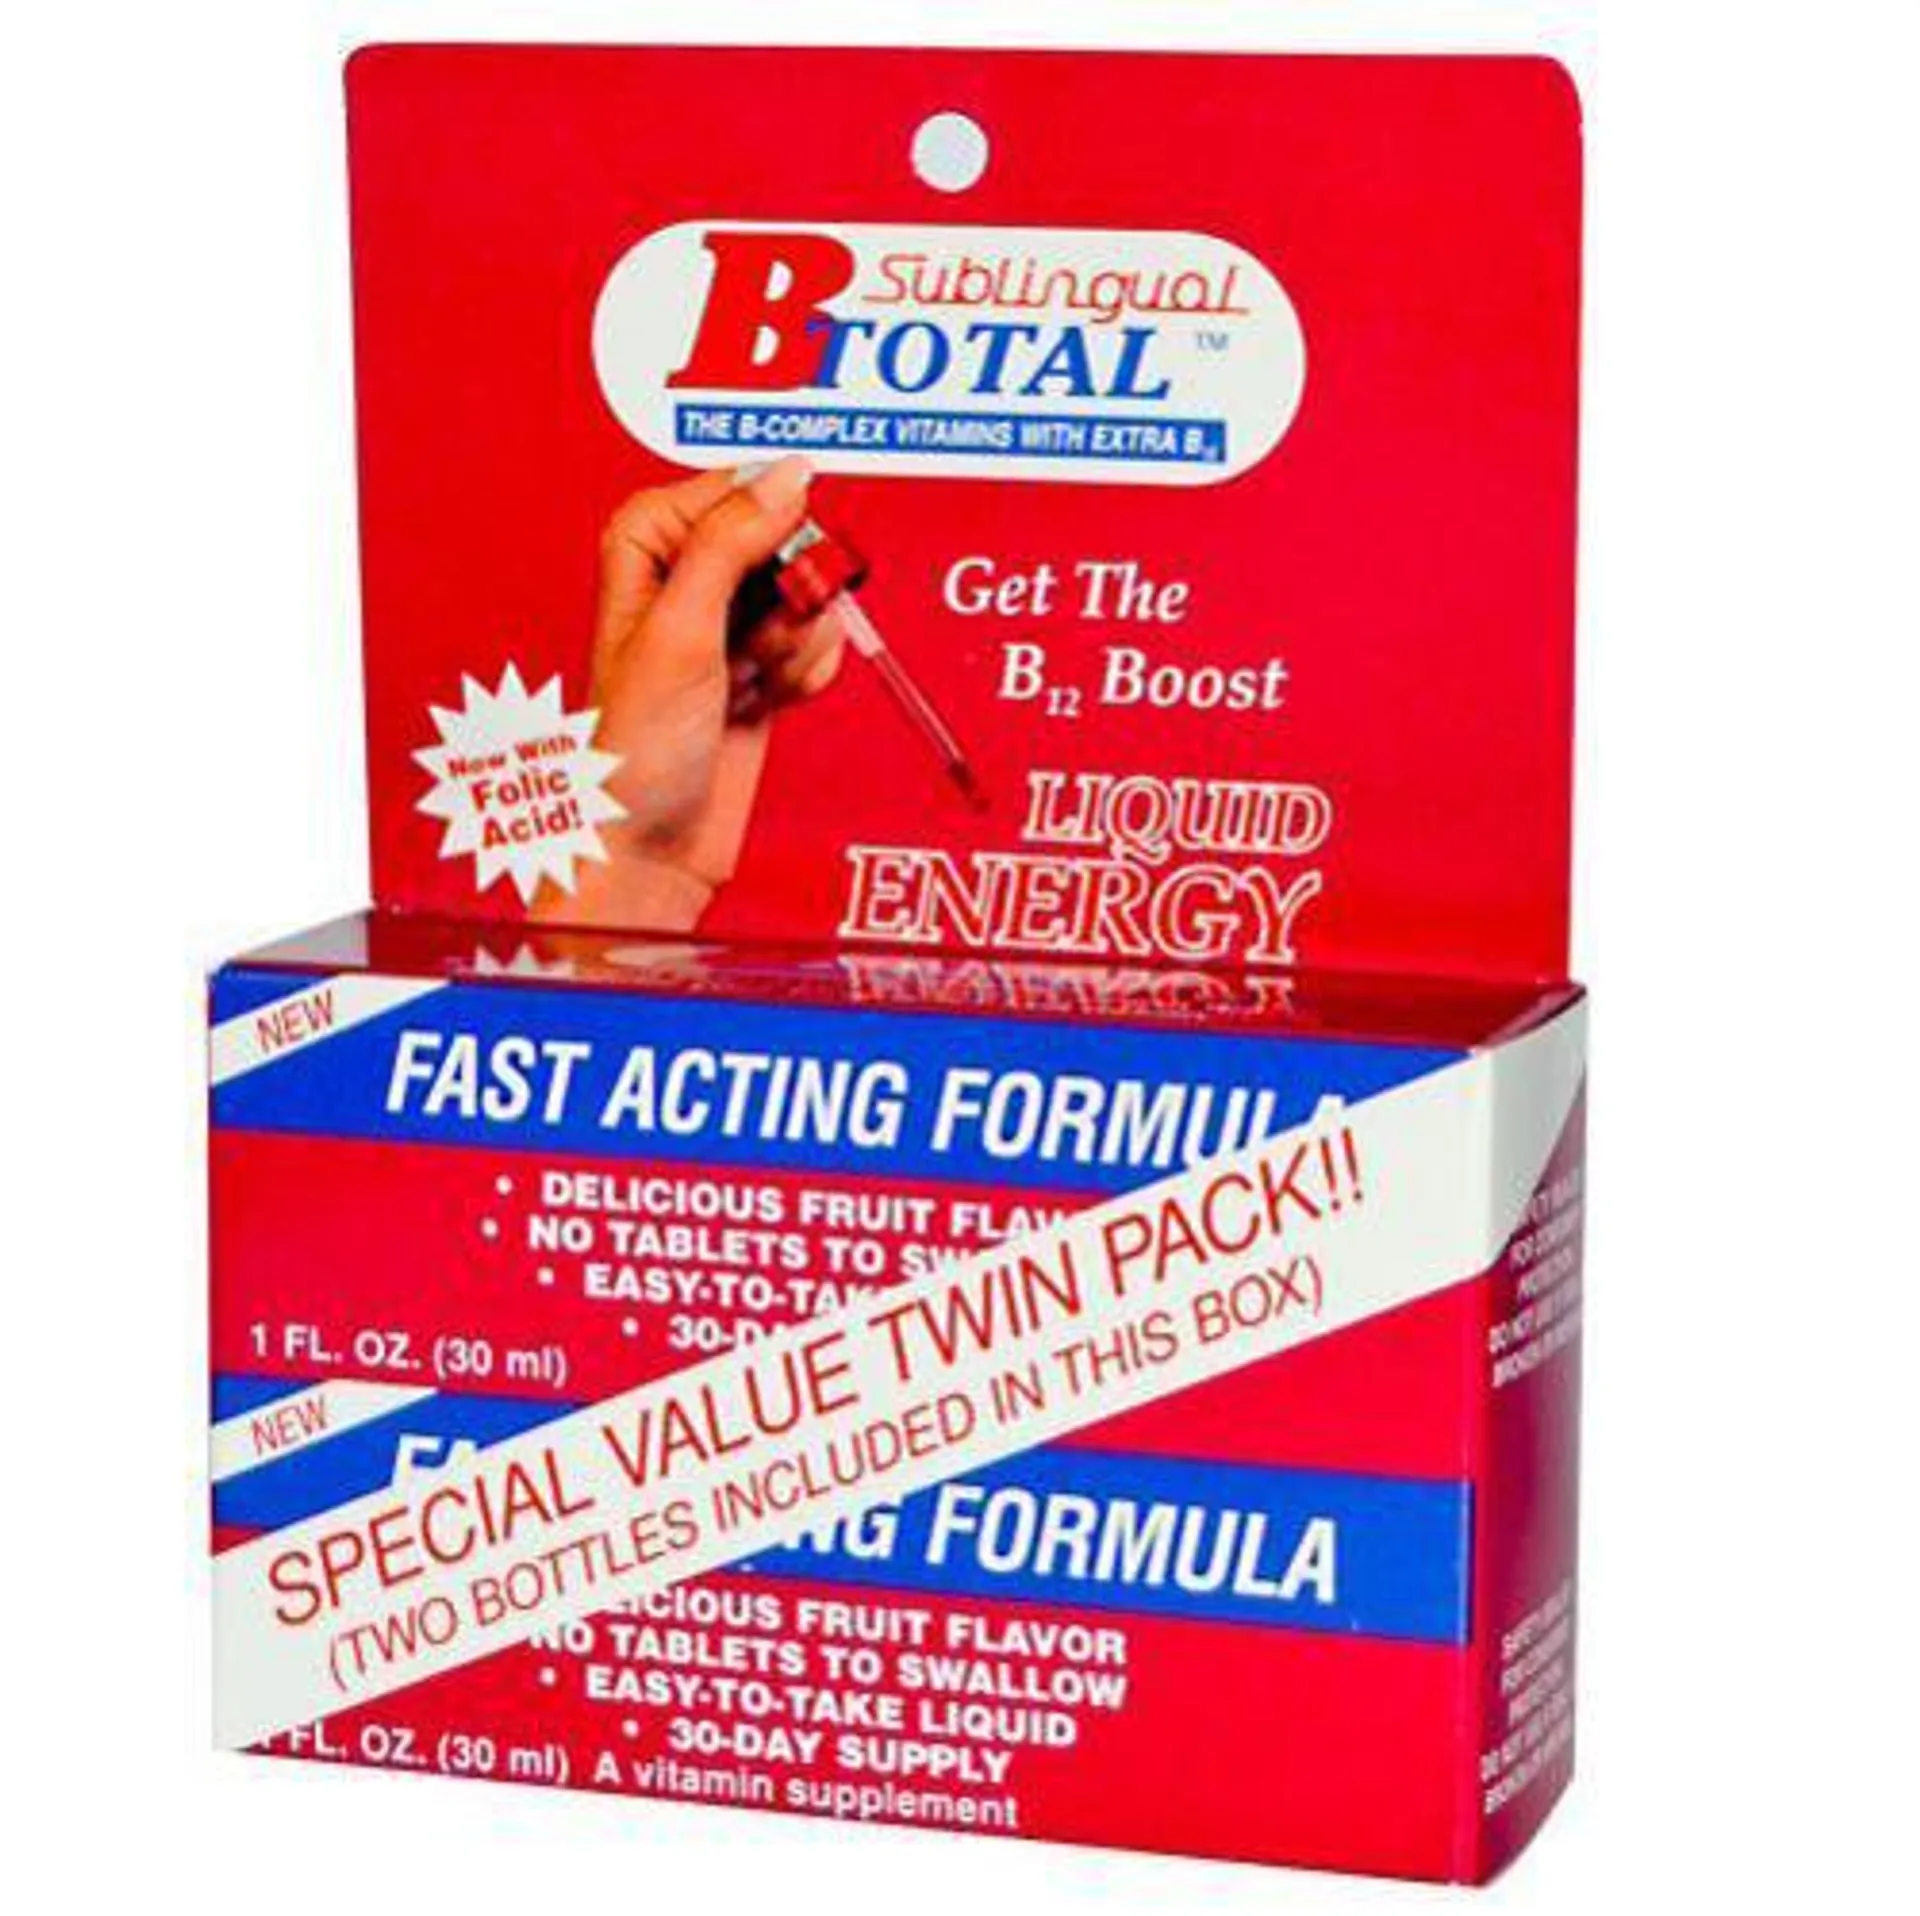 SUBLINGUAL B TOTAL TWIN PACK